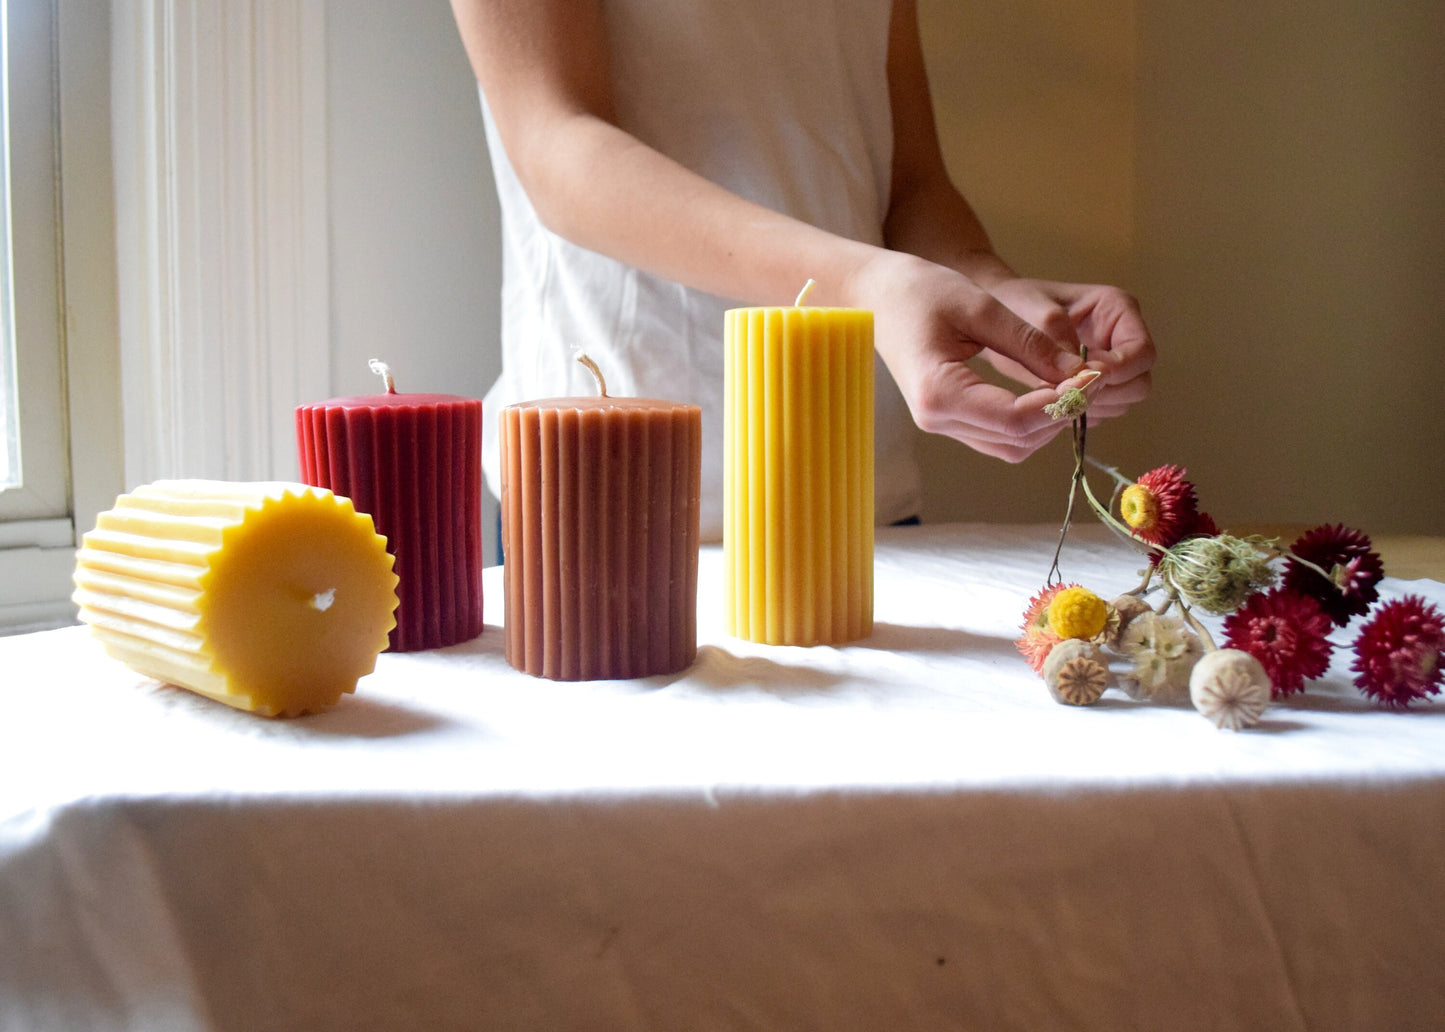 Fluted Pillar Candles/ Candle, Pillar Candle, Beeswax Candles, Beeswax - Two Sizes, in Burgundy, Caramel and Golden Yellow - Eco Luxury